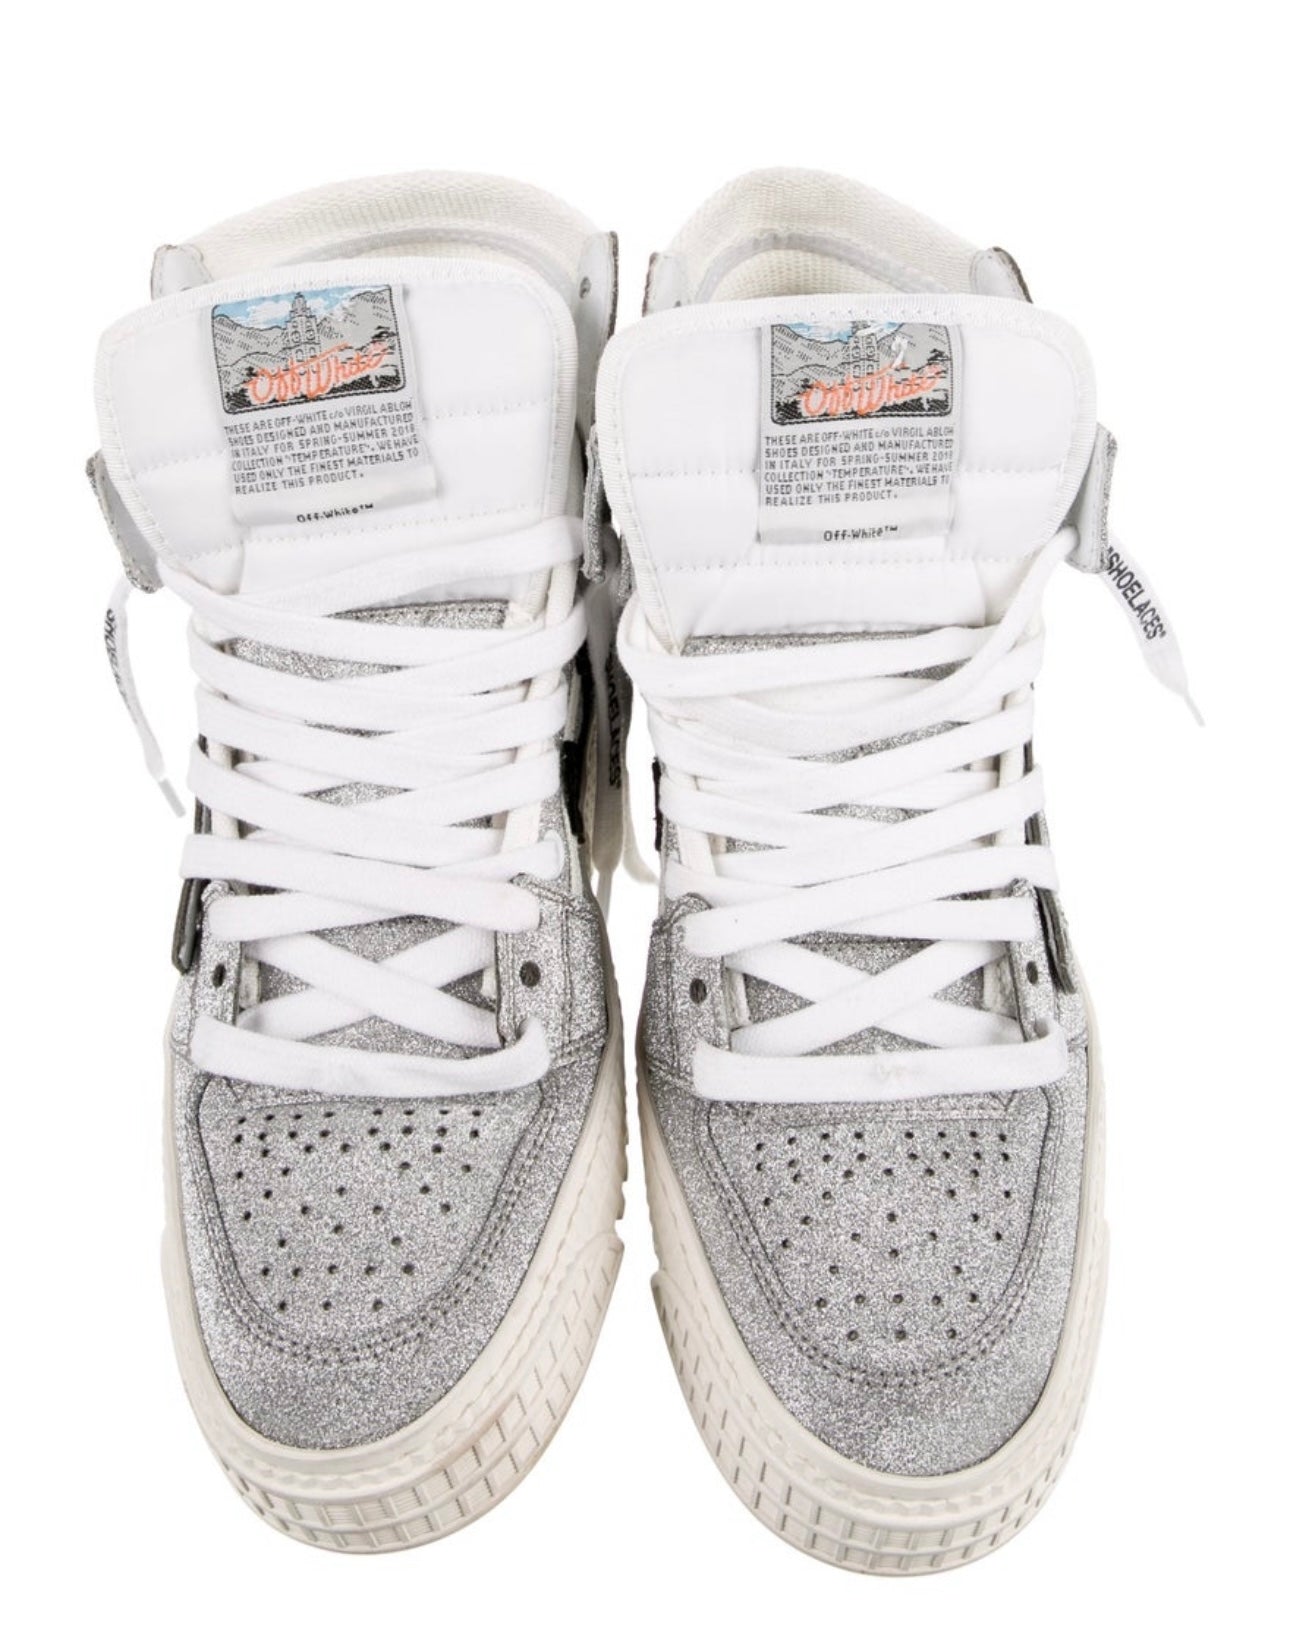 OFF-WHITE - Virgil Abloh Glitter High-Top Court Sneakers